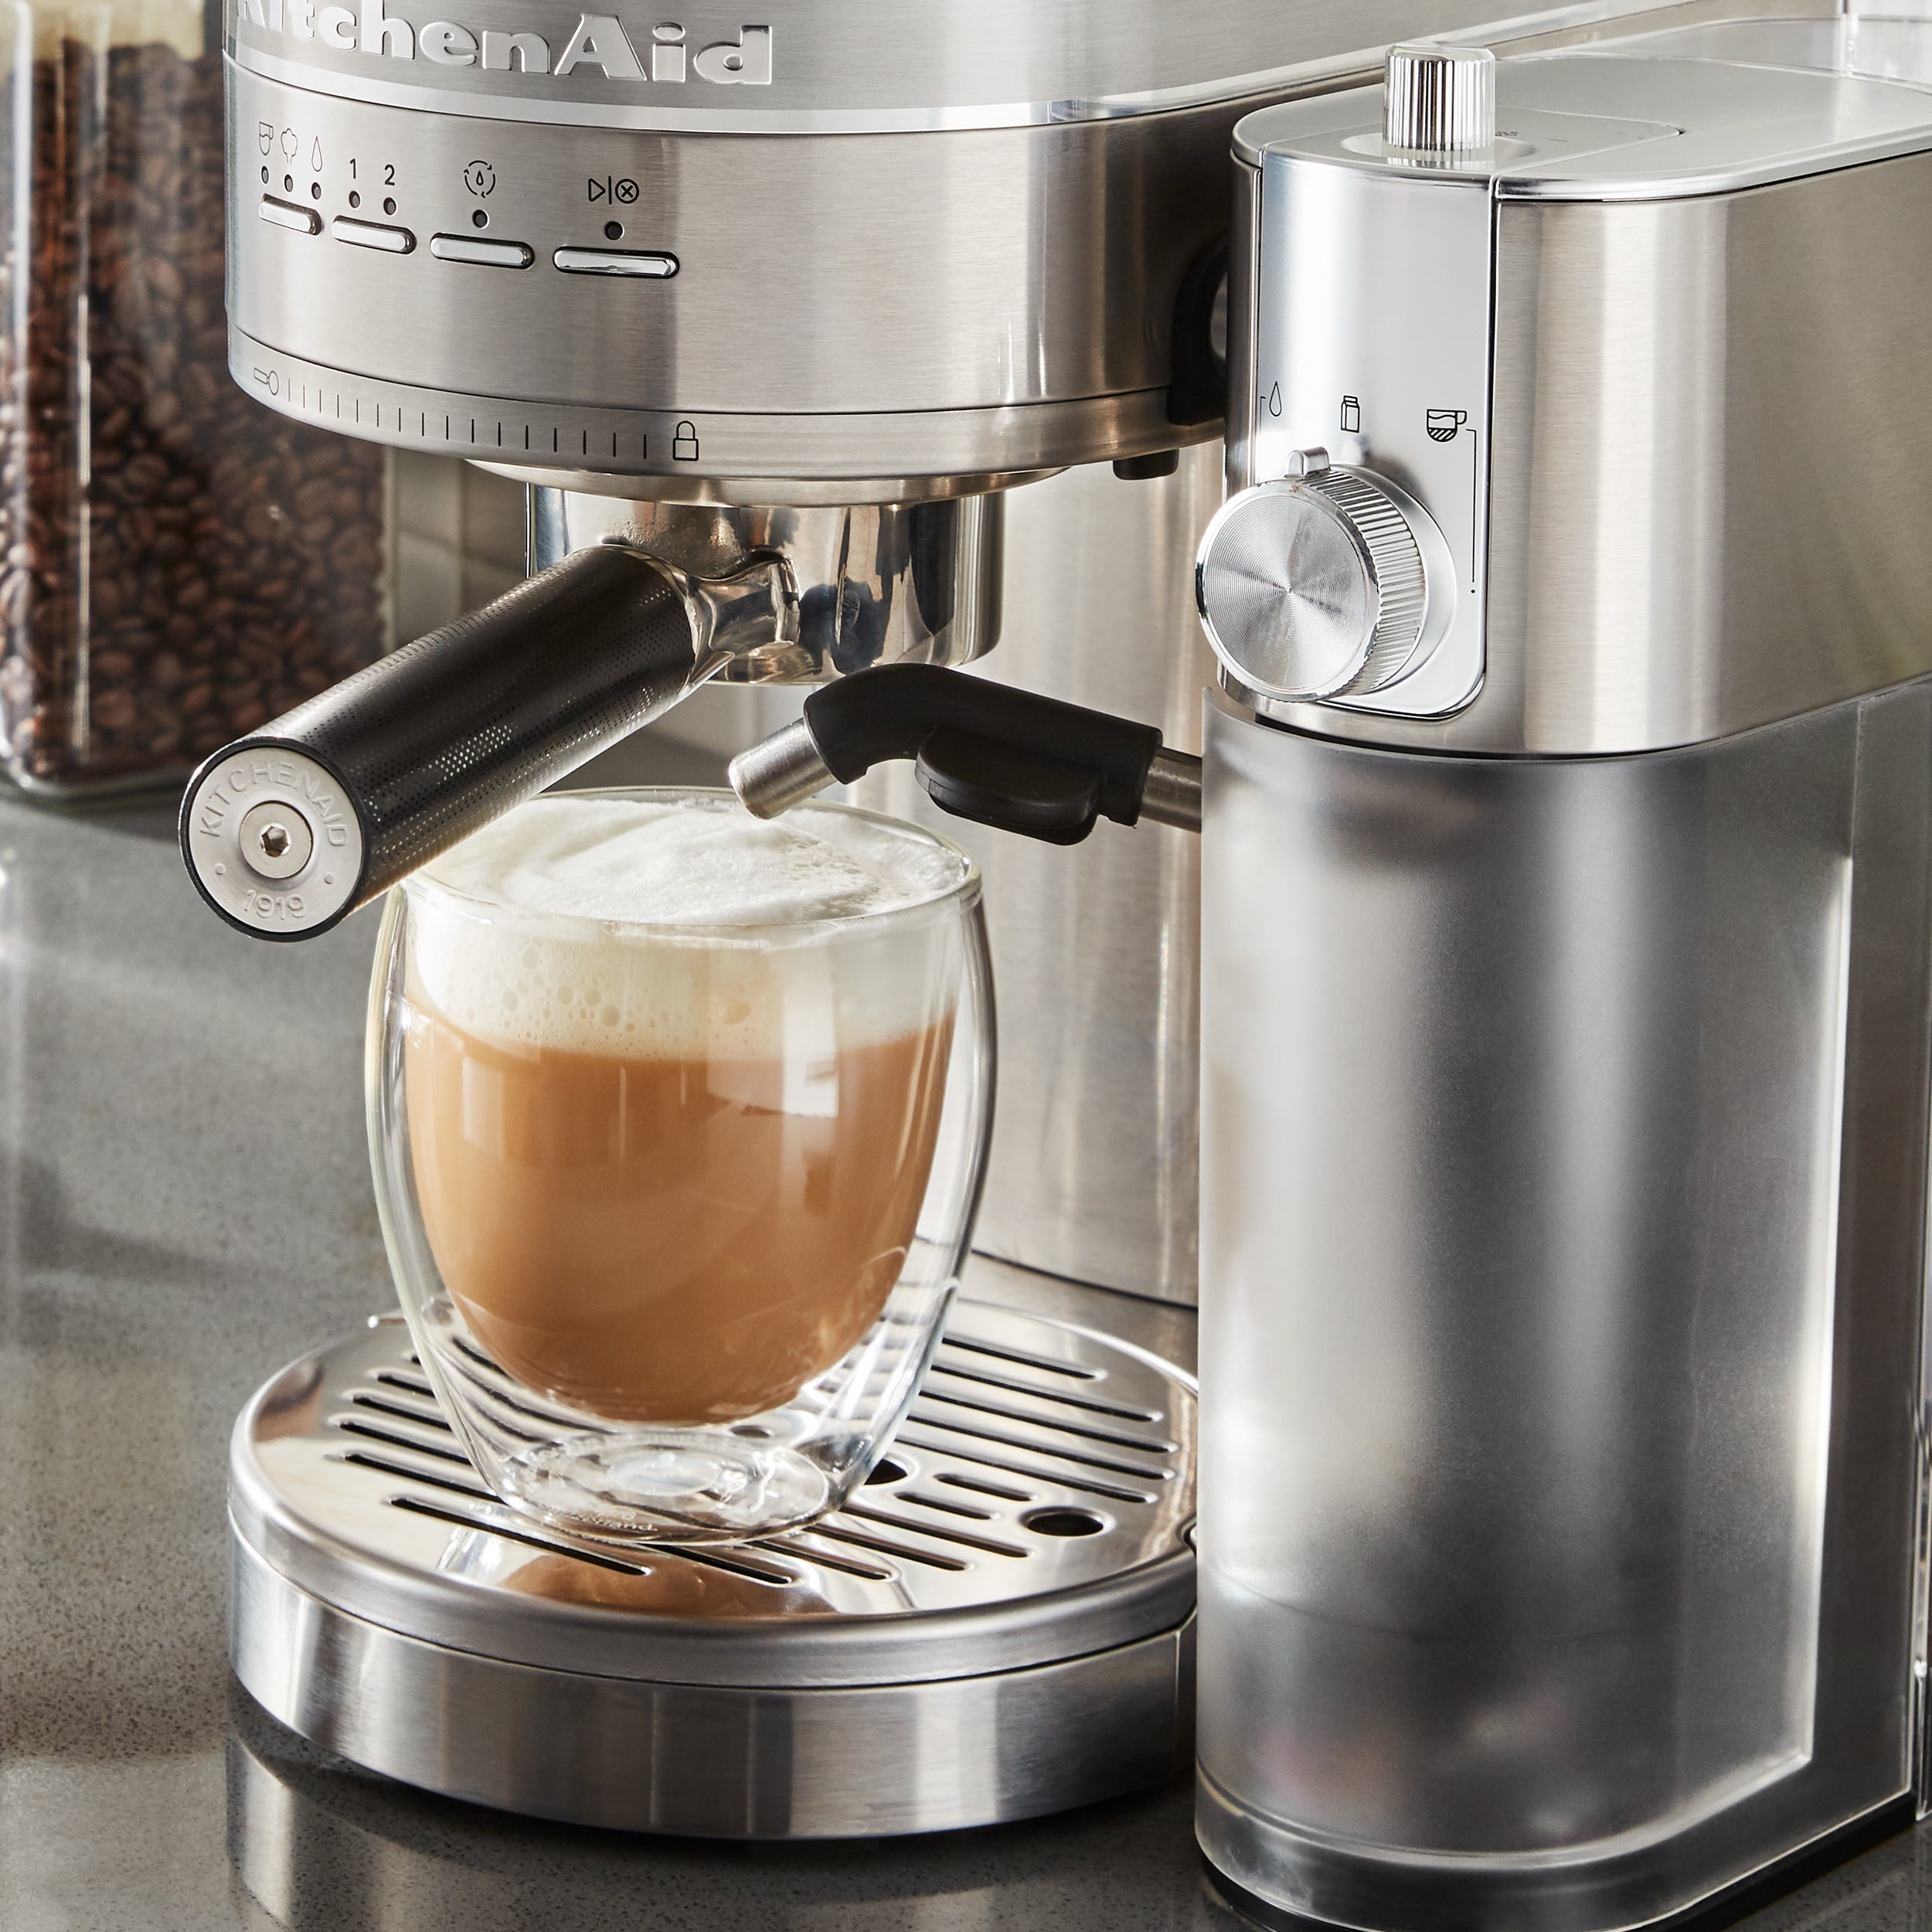 KitchenAid's semi-automatic espresso machine ships with the automatic milk  frother at $190 off